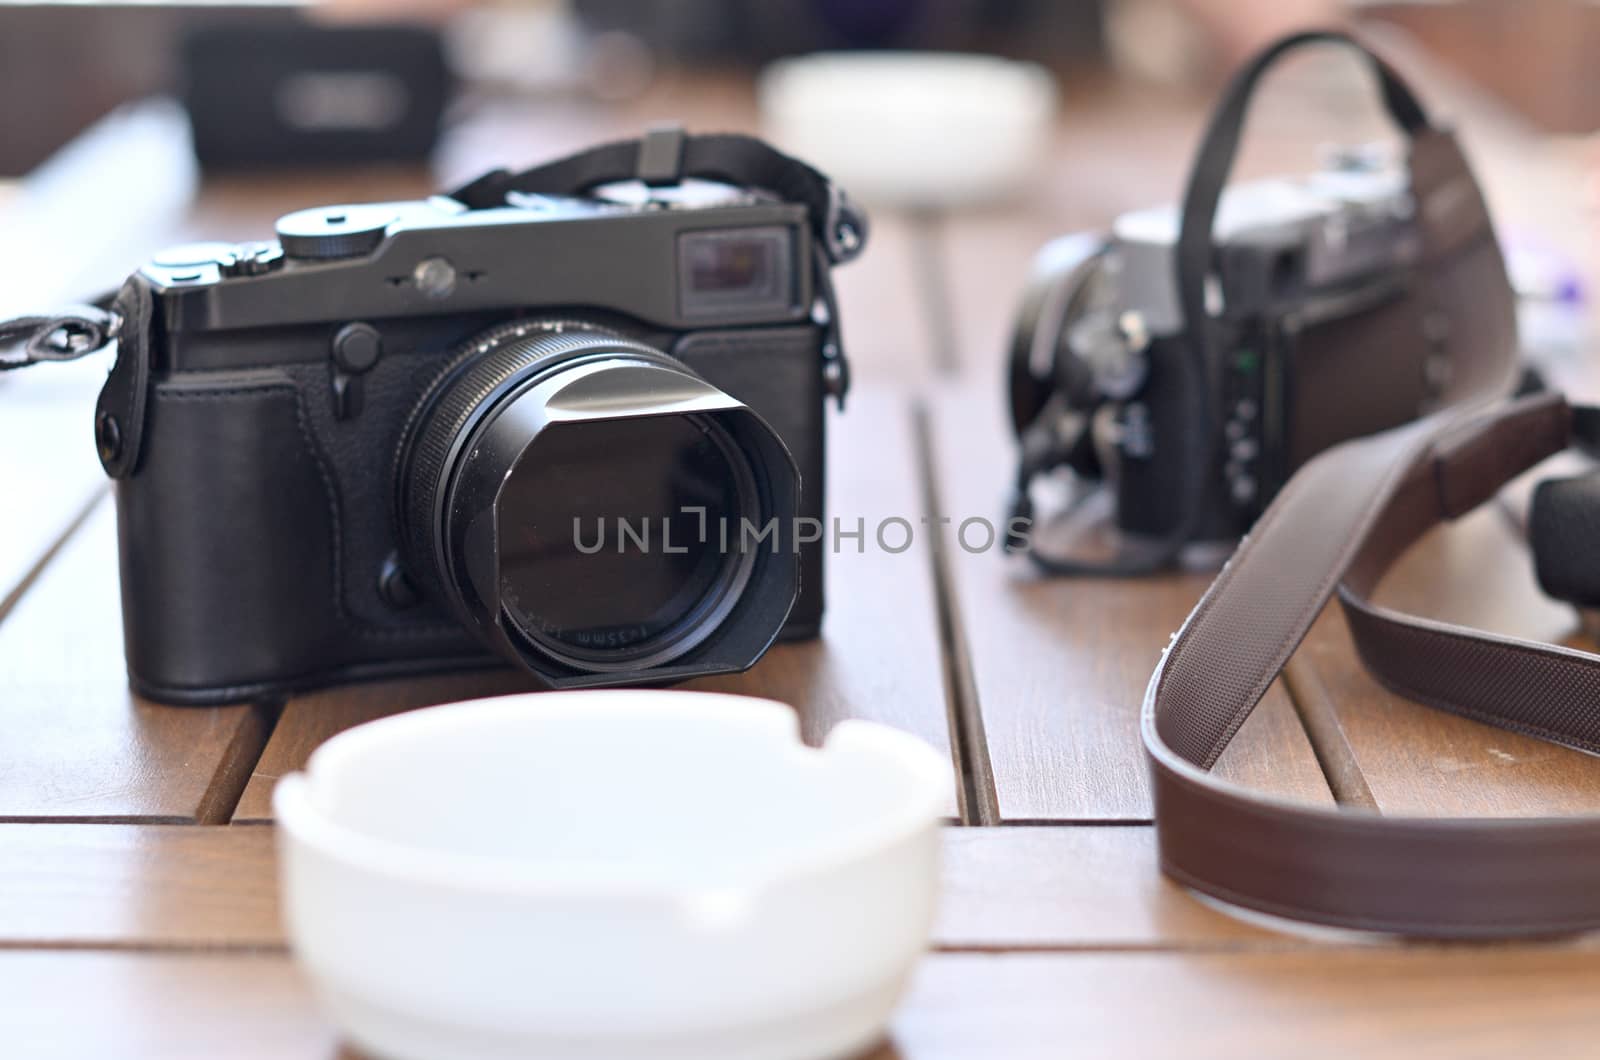 Mirrorless cameras during the break between filming and a white ashtray lying on a wooden table